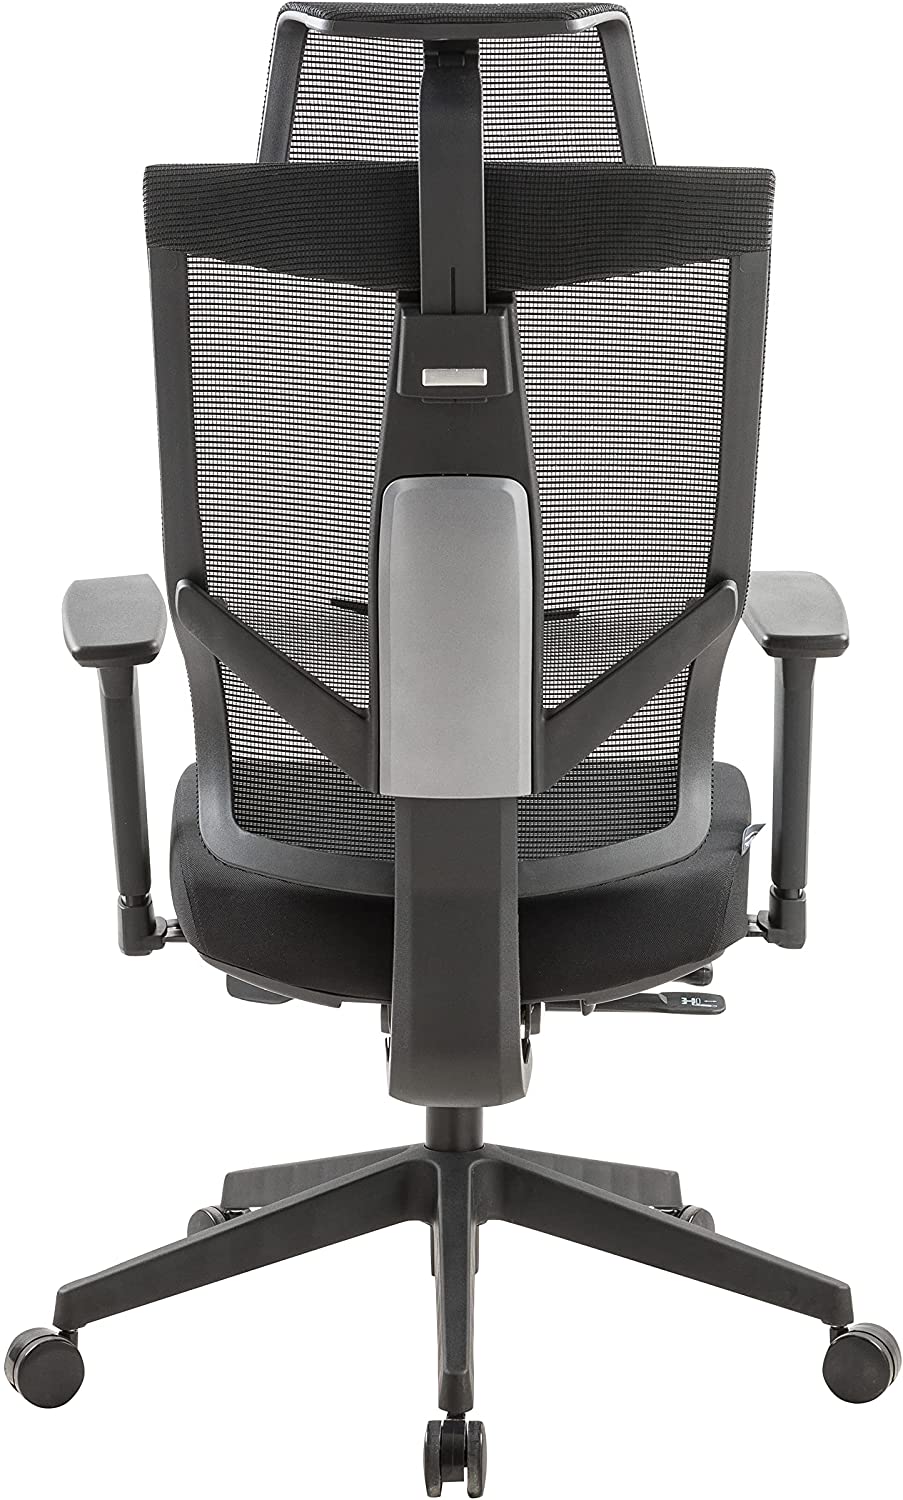 Aero Chair Ergonomic Design, Premium Office & Computer Chair with Multi-adjustable features by Navodesk (Pure Black)_ Buy Online at Best Price in UAE